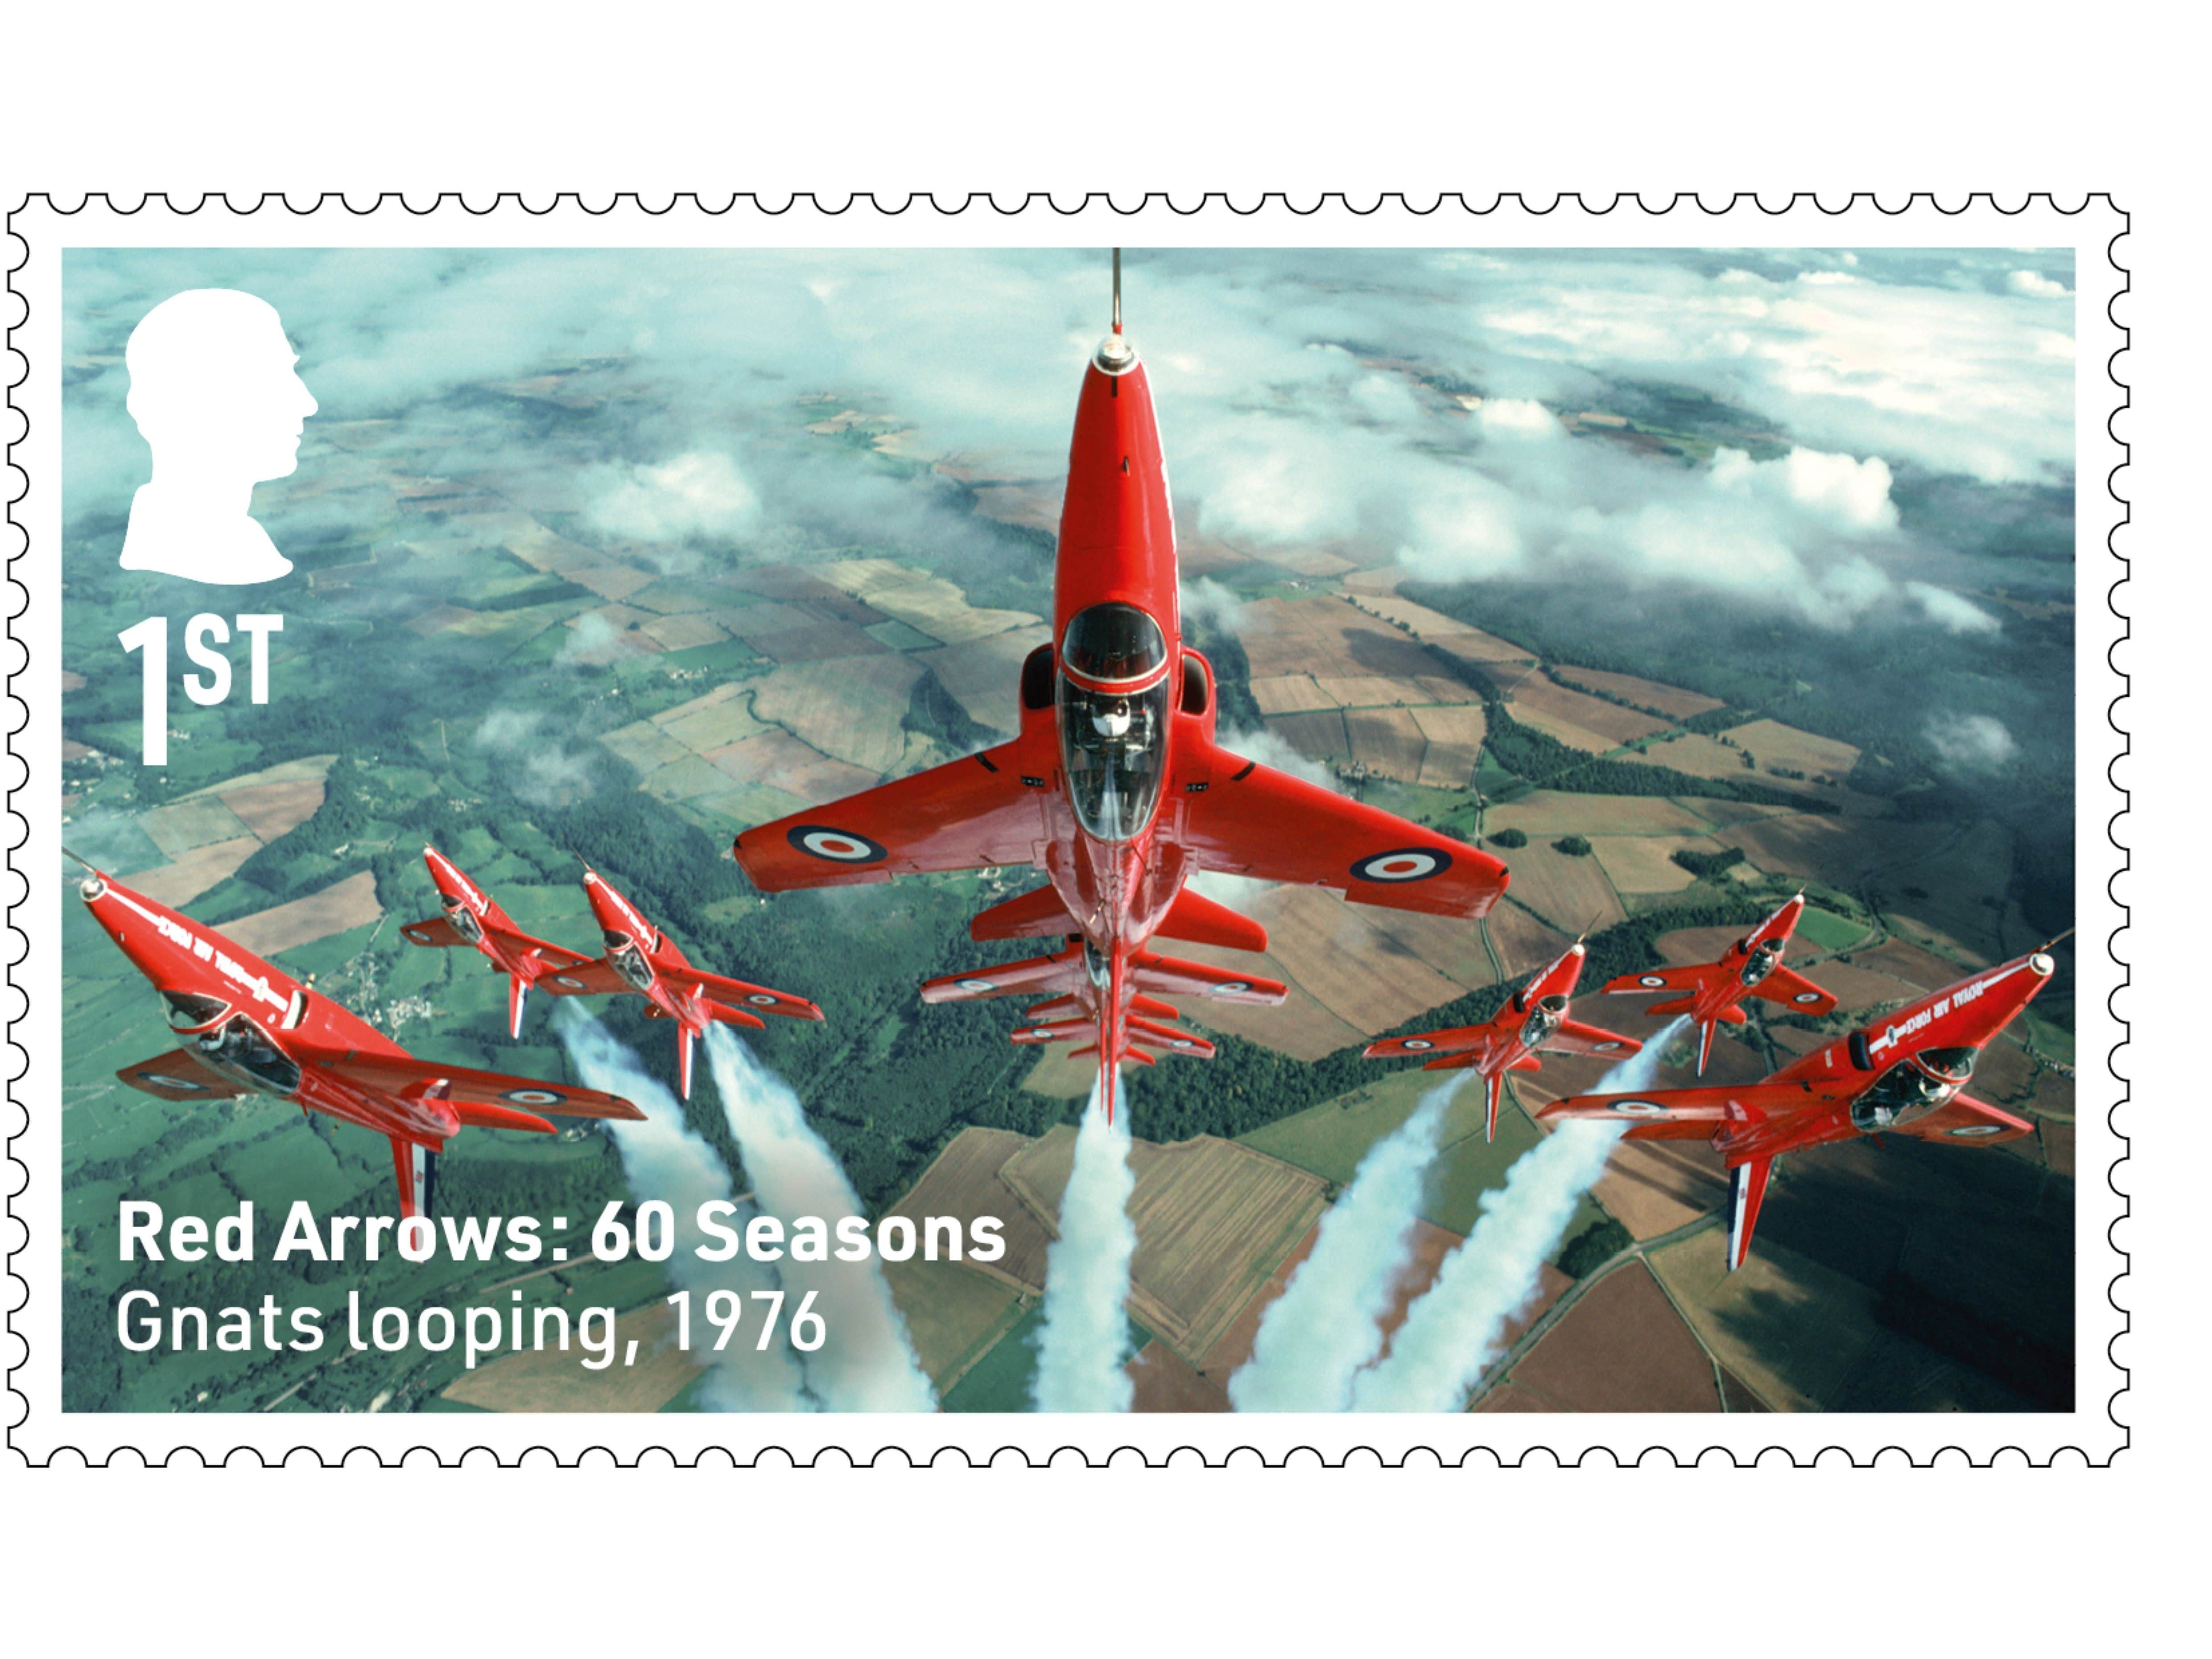 New stamps to mark 60th display season of the Red Arrows